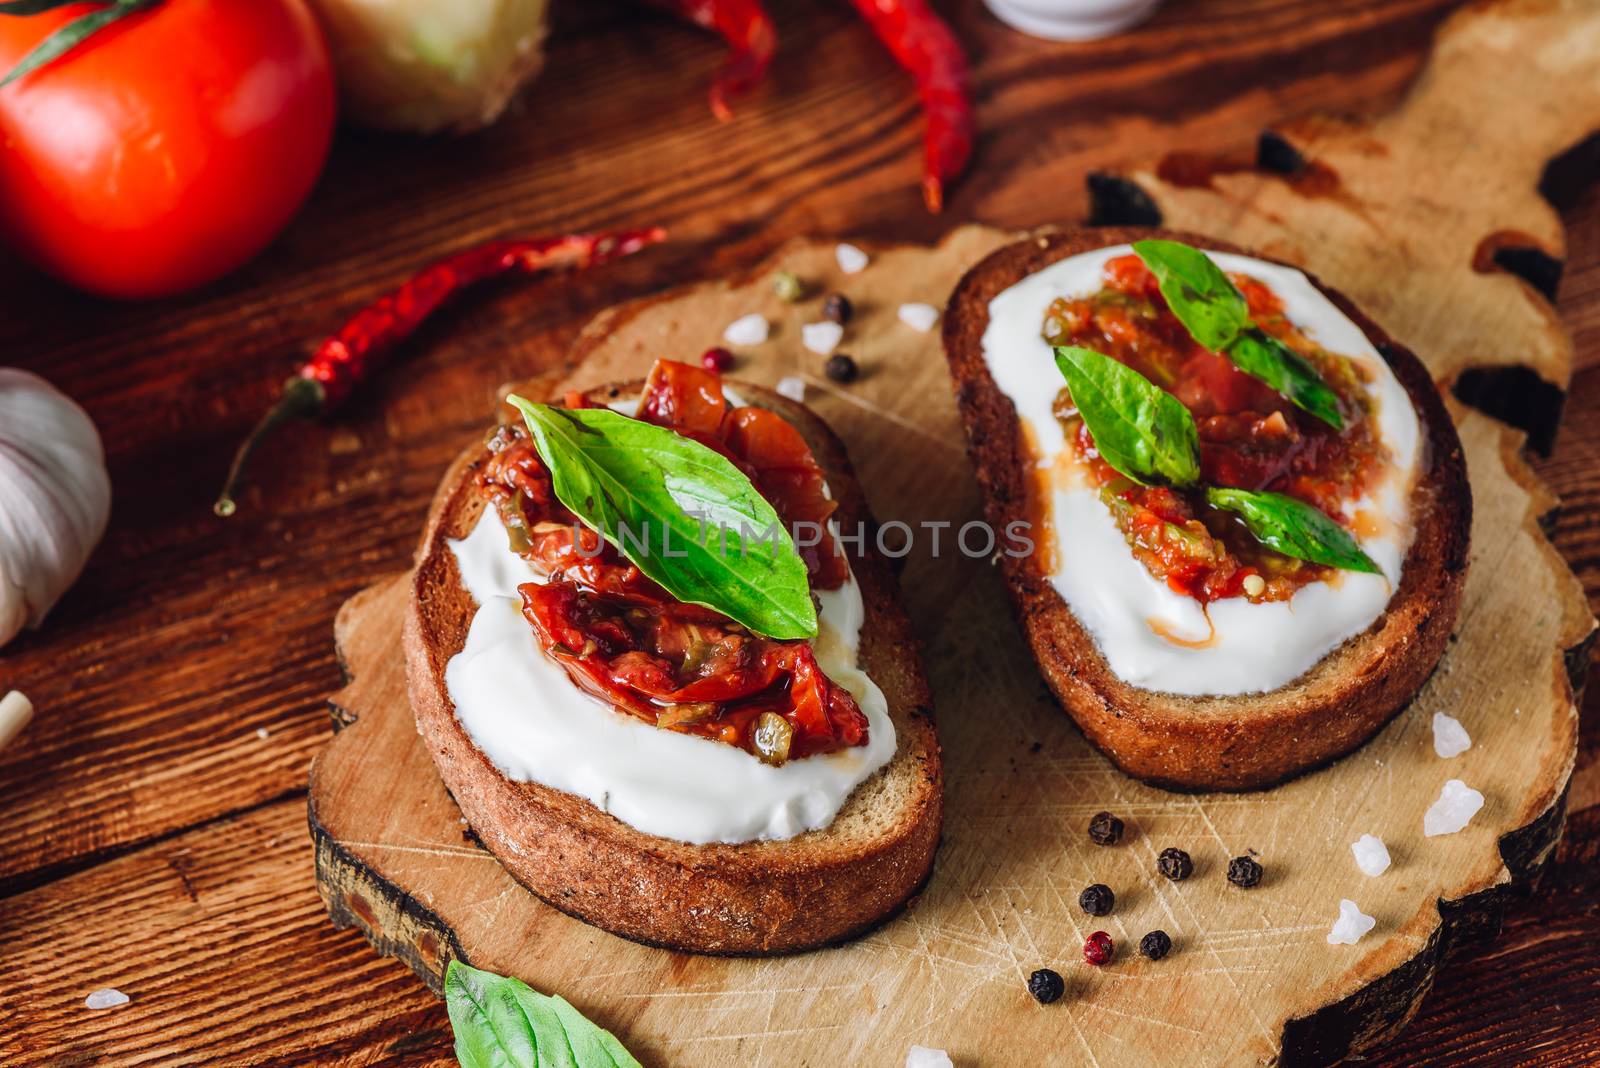 Bruschetta with Dried Tomatoes and Spicy Sauce by Seva_blsv